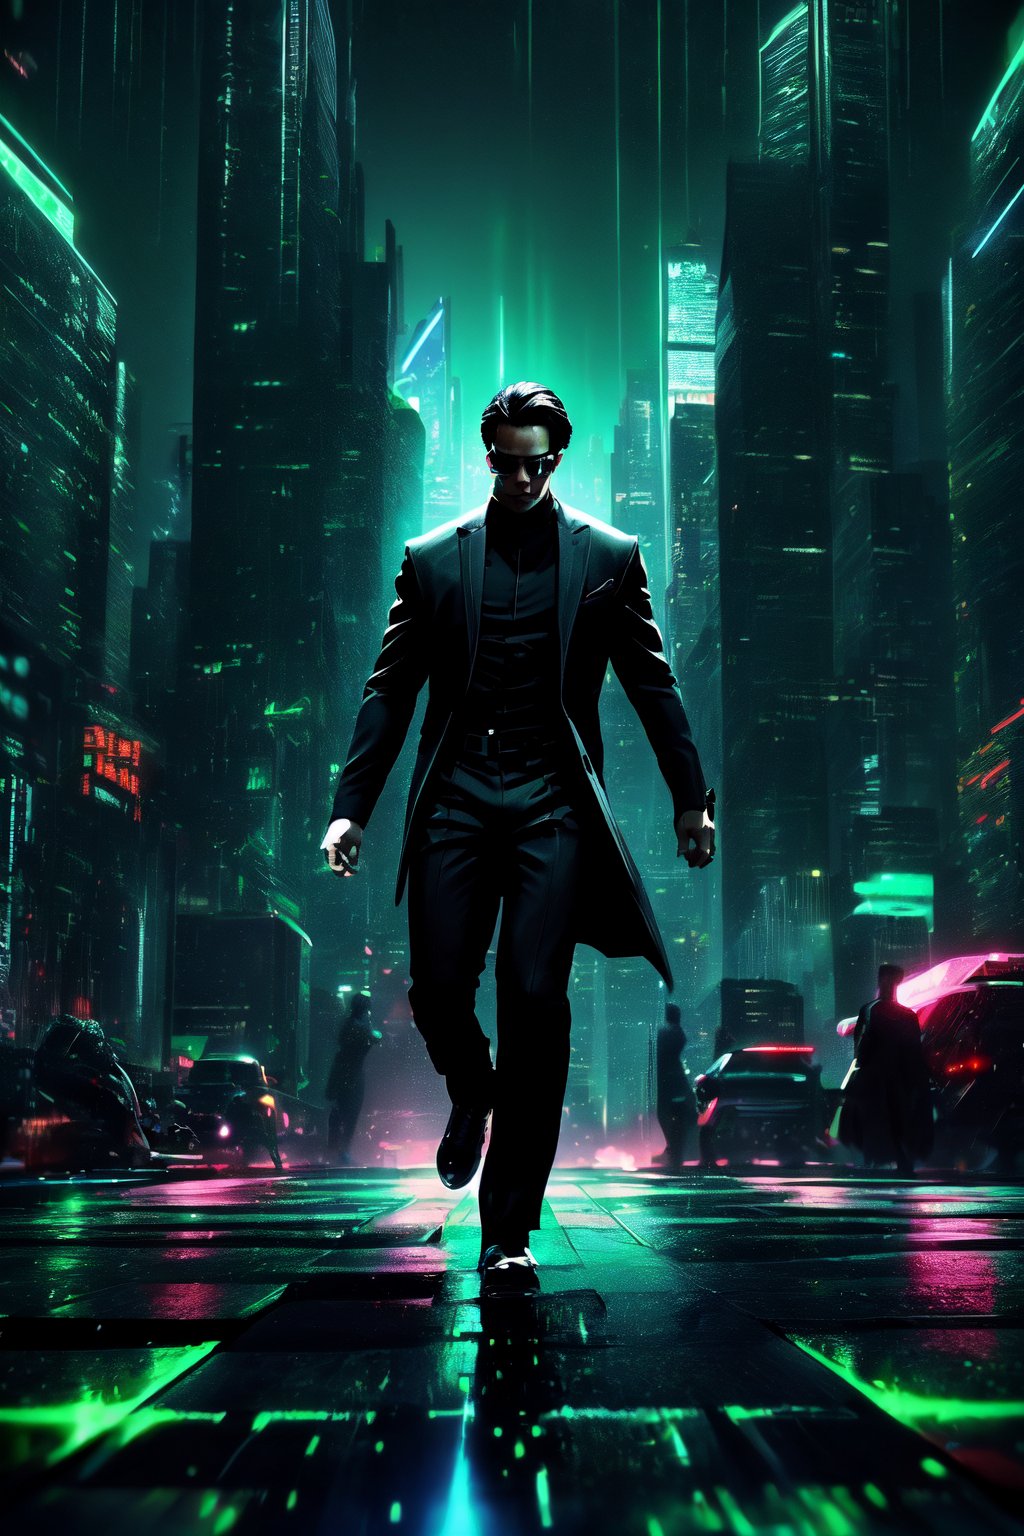 high-definition, dynamic, action-packed, 
1man, Matrix style, leaping, mid-air, all-black suit, black glasses, athletic build, intense expression, 
((depth of field)), urban skyline, futuristic cityscape, dark ambiance, digital code rain, neon lights, gorgeous movements, Code matrix cascading from top to bottom, by FuturEvoLab, 
gravity-defying, cyberpunk atmosphere, surreal, digital world, 